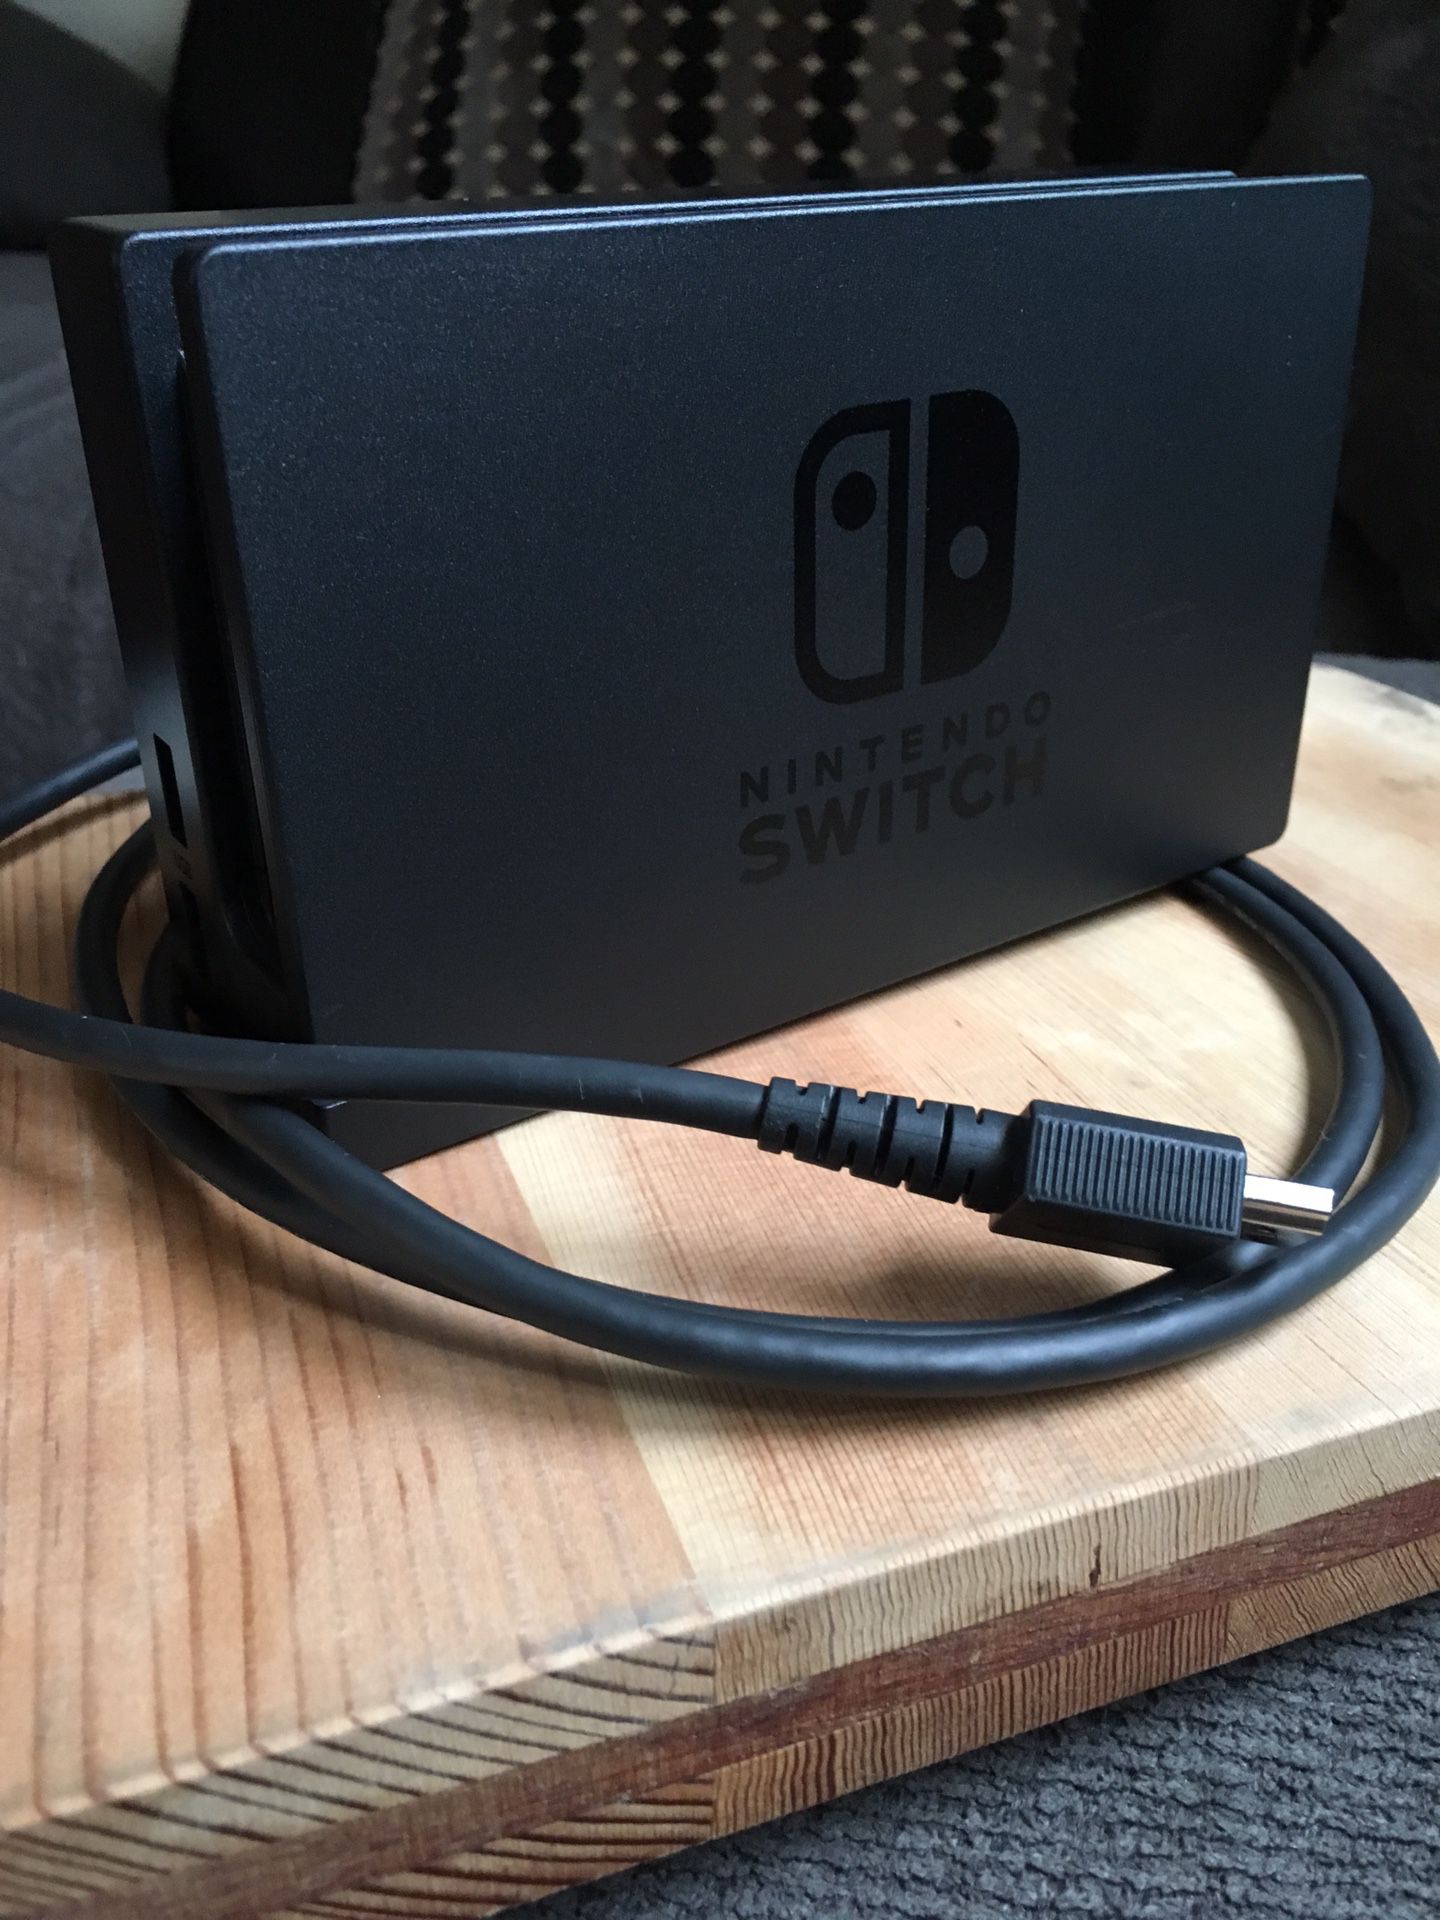 🔥NINTENDO SWITCH DOCK🔥 - 🔥HDMI CABLE INCLUDED🔥